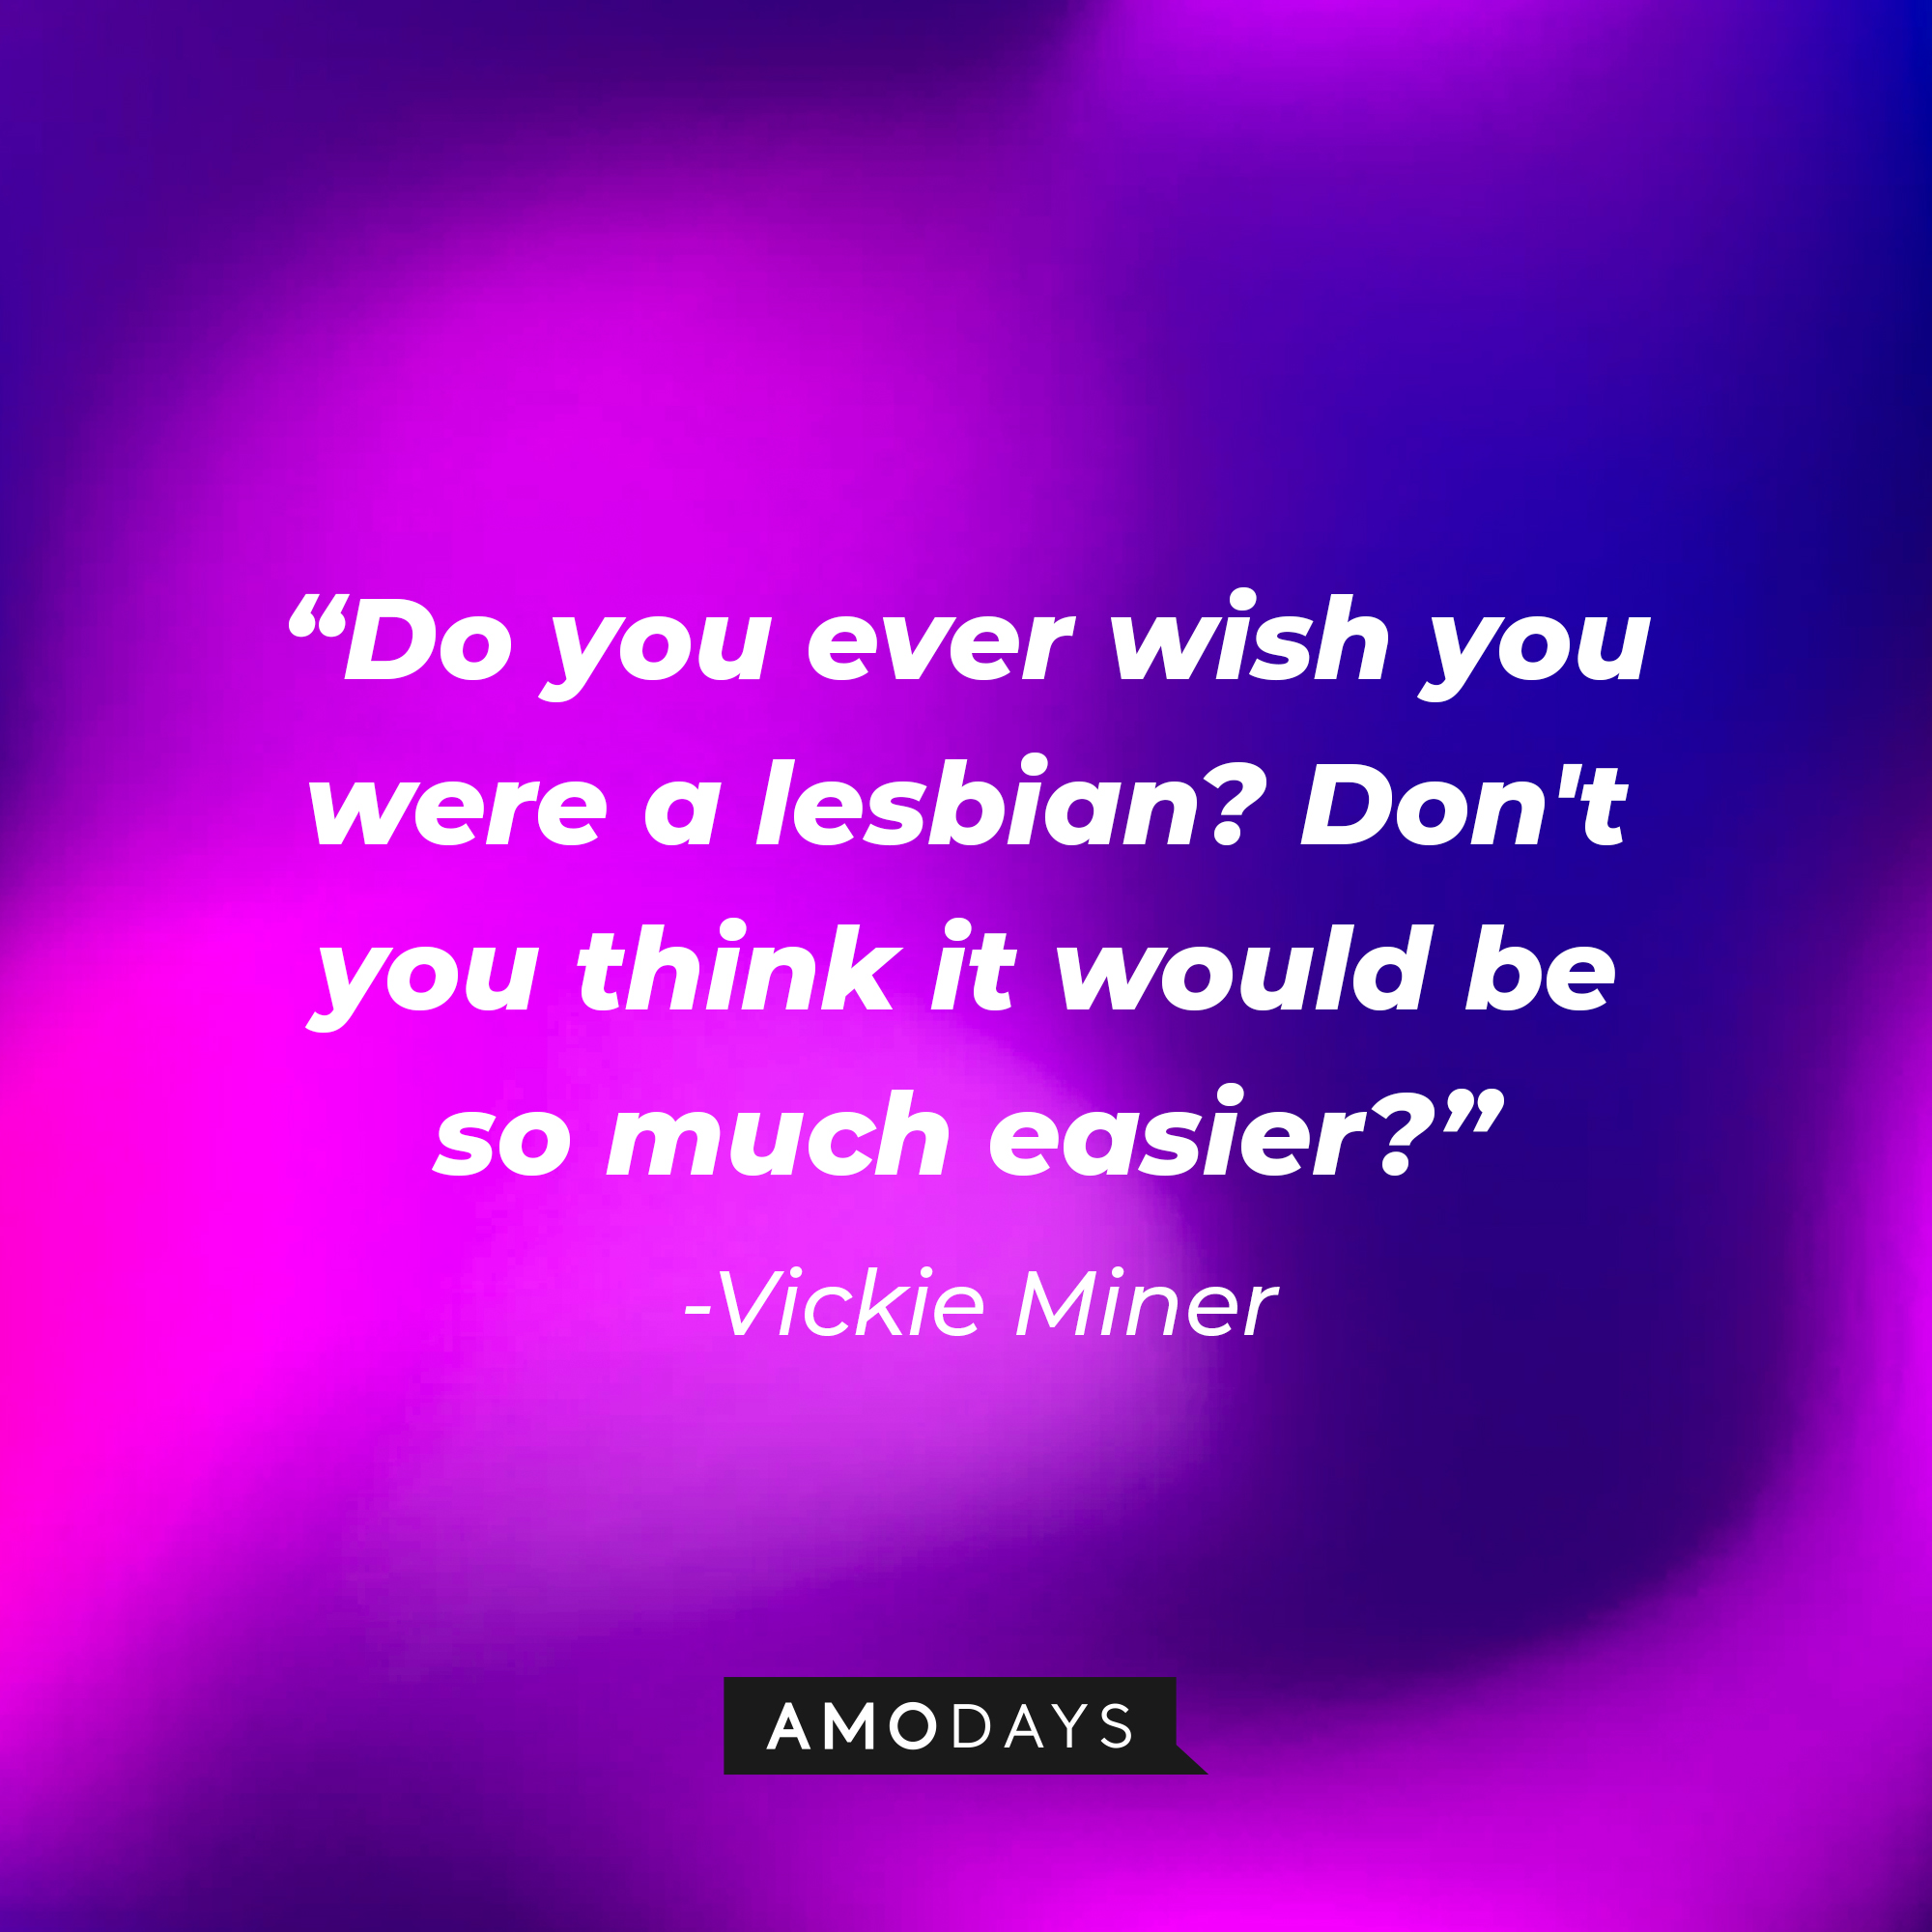 Vickie Miner’s quote: “Do you ever wish you were a lesbian? Don't you think it would be so much easier?” | Source: AmoDays